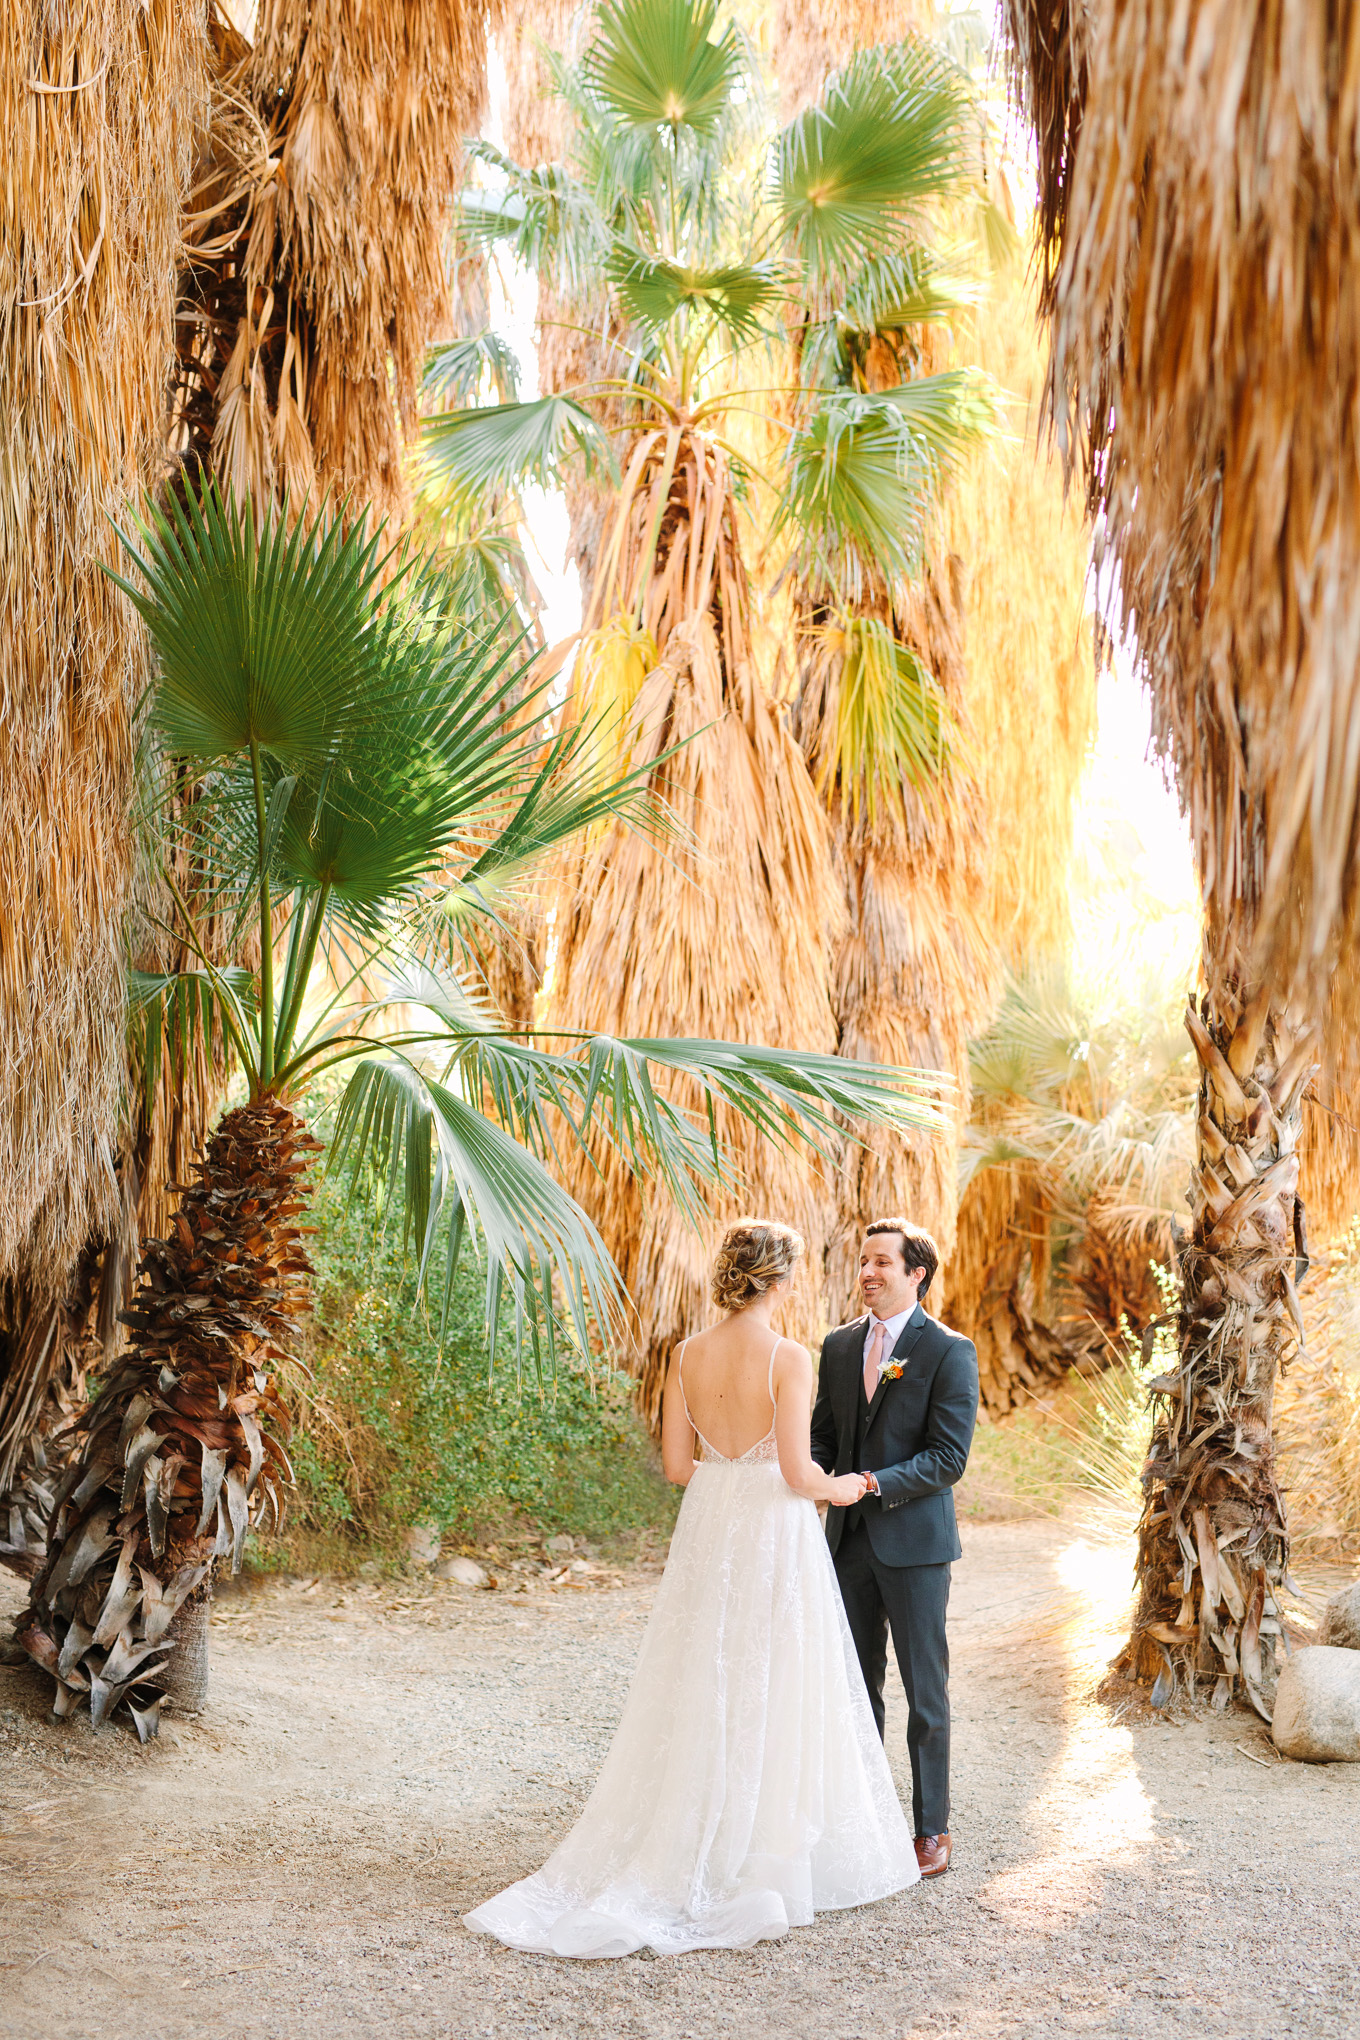 Bride and groom first look at Living Desert Zoo wedding | Best Southern California Garden Wedding Venues | Colorful and elevated wedding photography for fun-loving couples | #gardenvenue #weddingvenue #socalweddingvenue #bouquetideas #uniquebouquet   Source: Mary Costa Photography | Los Angeles 